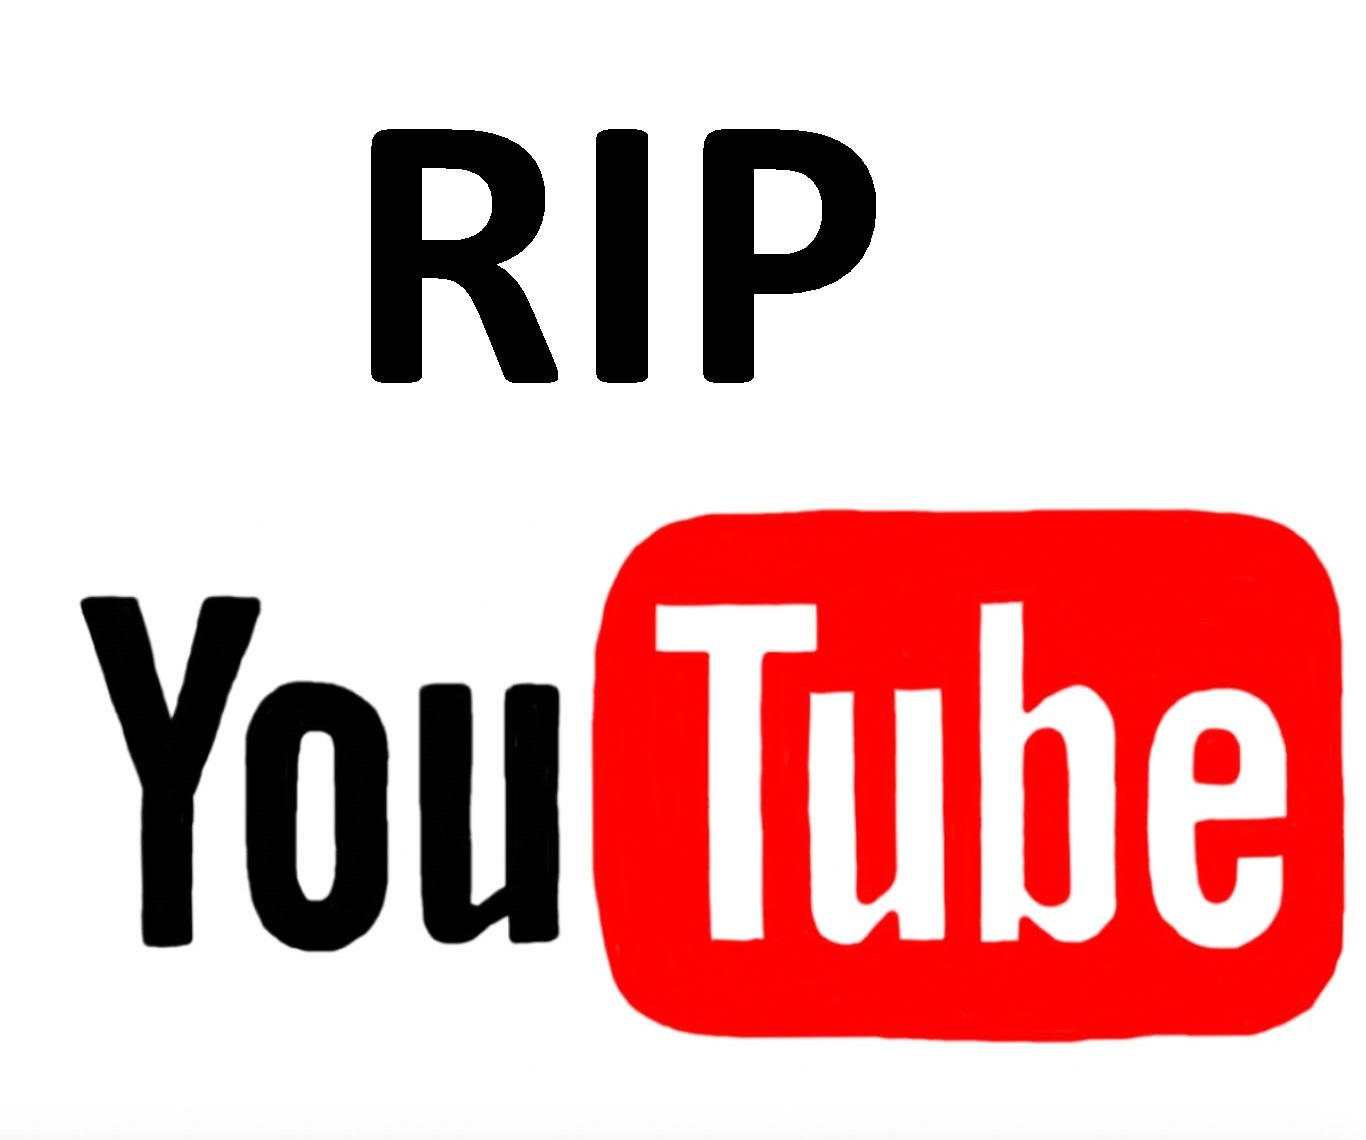 Funny YouTube Logo - Only '90s kids will remember the old YouTube logo : funny